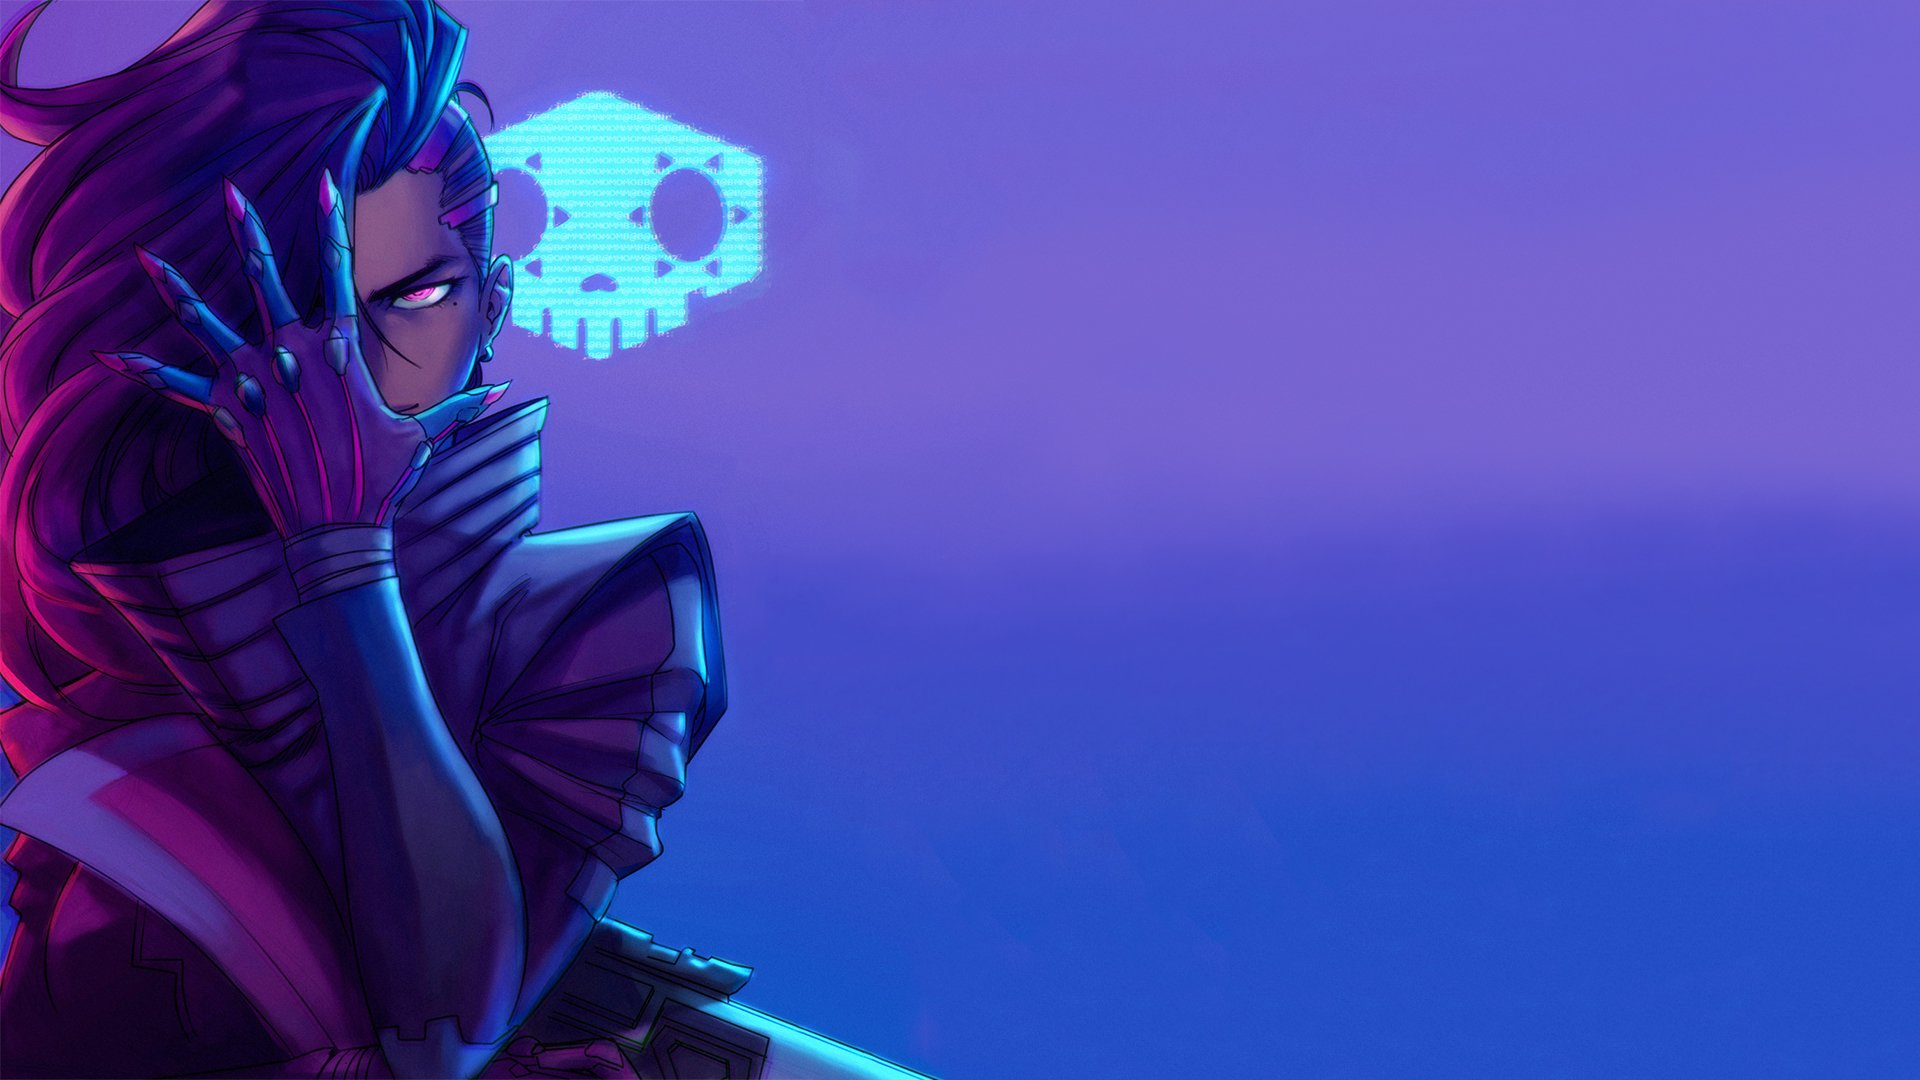 1920x1080 90+ Sombra (Overwatch) HD Wallpapers and Backgrounds